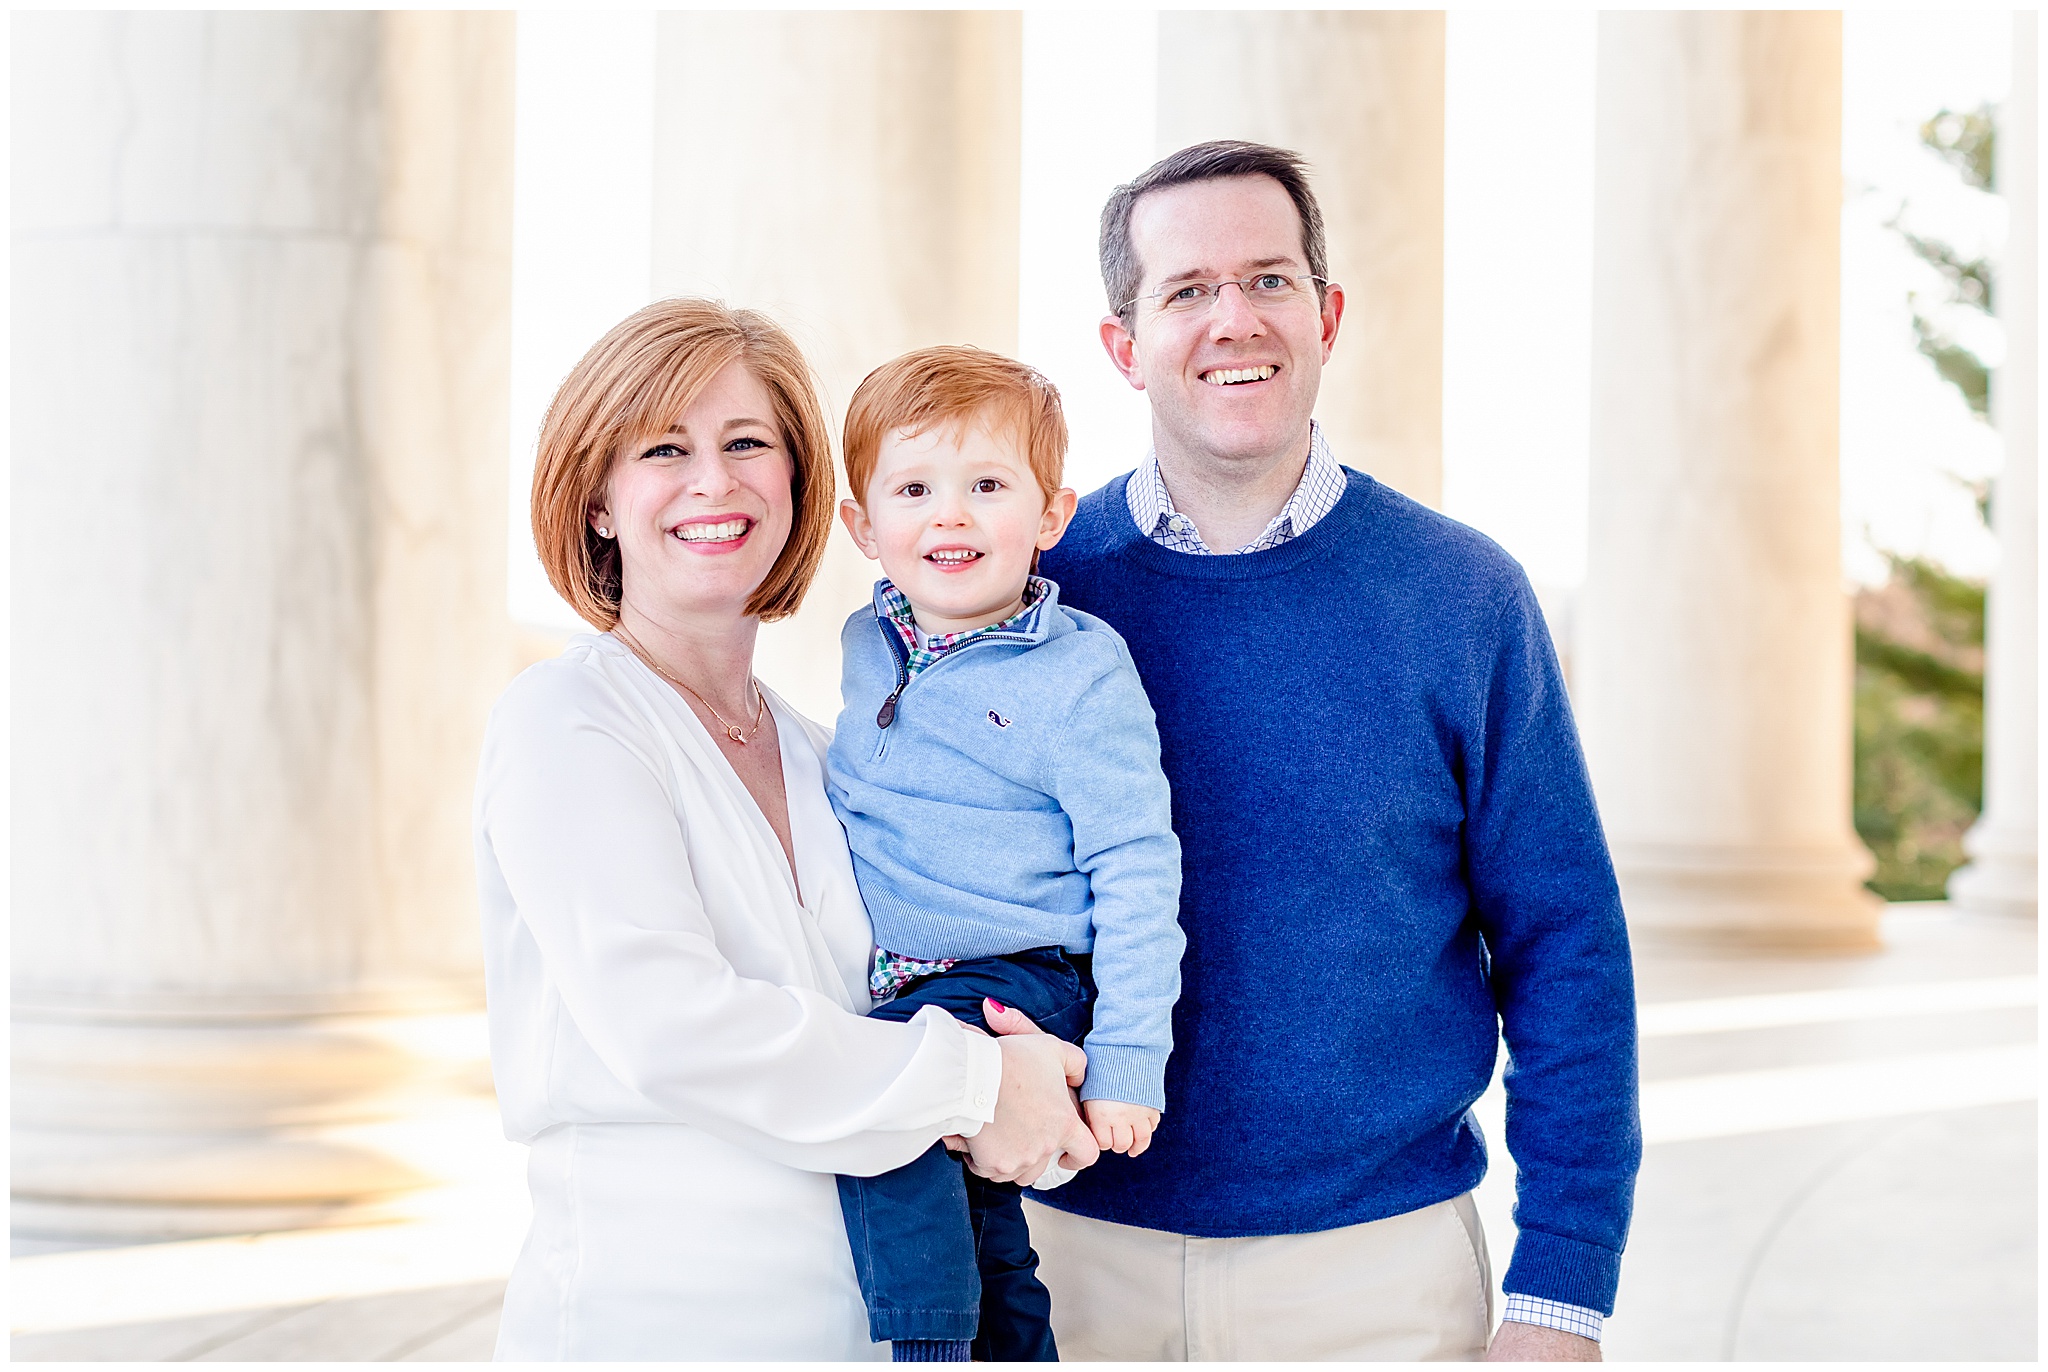 Gorgeous Family Photo Session at the Jefferson Memorial by Washington, DC Photographer Kofmehl Photography